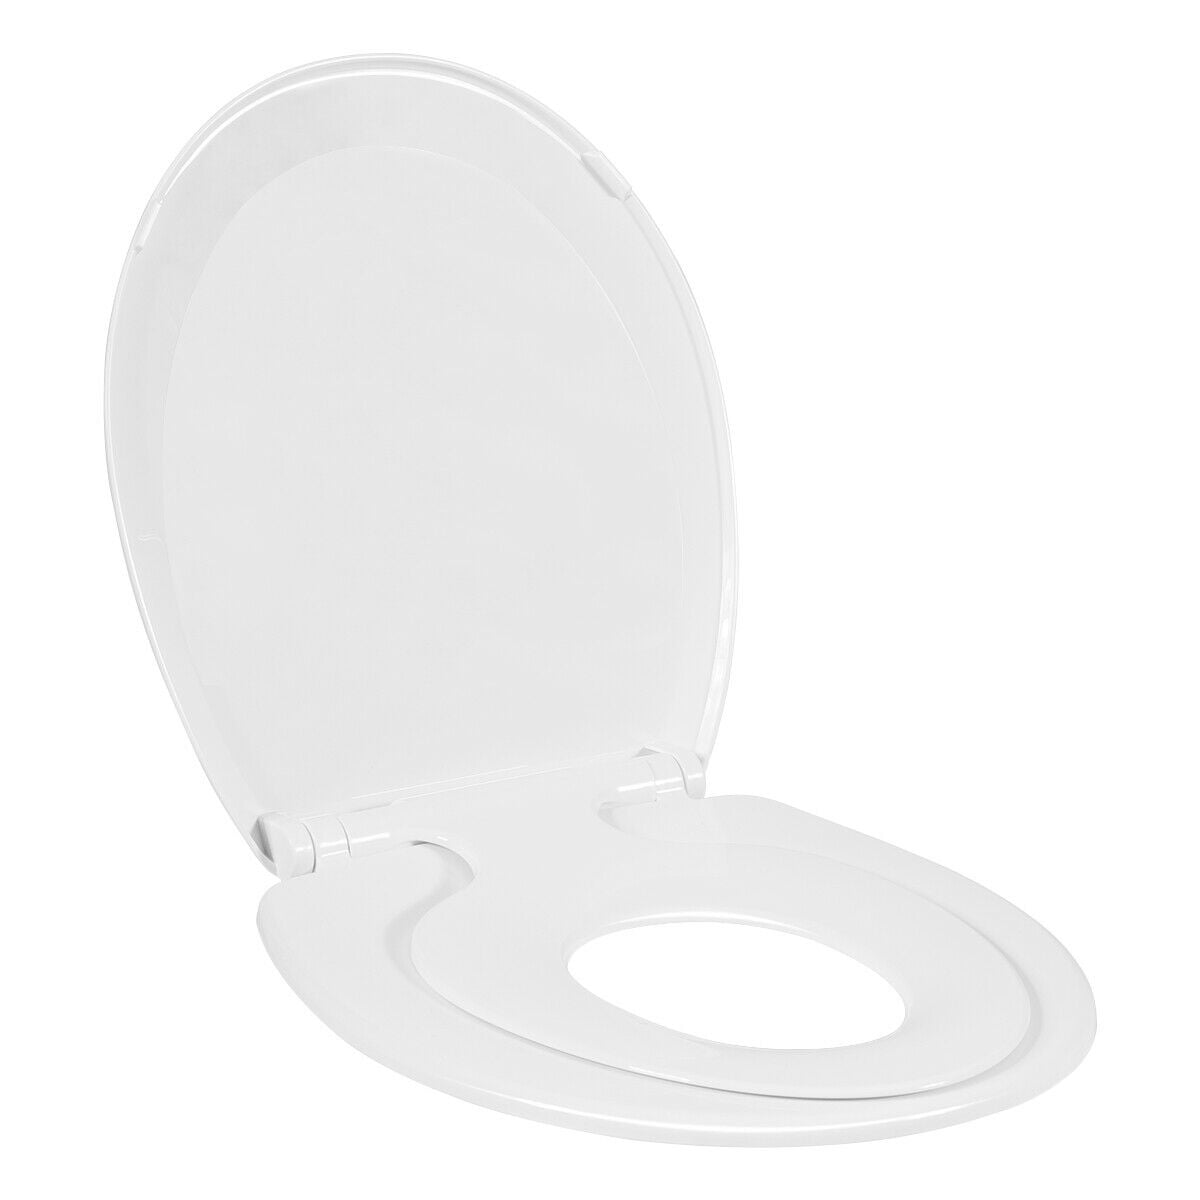 Toddlers & Adult Round Toilet Seat with Built-in Potty Training Seat Slow-Close 